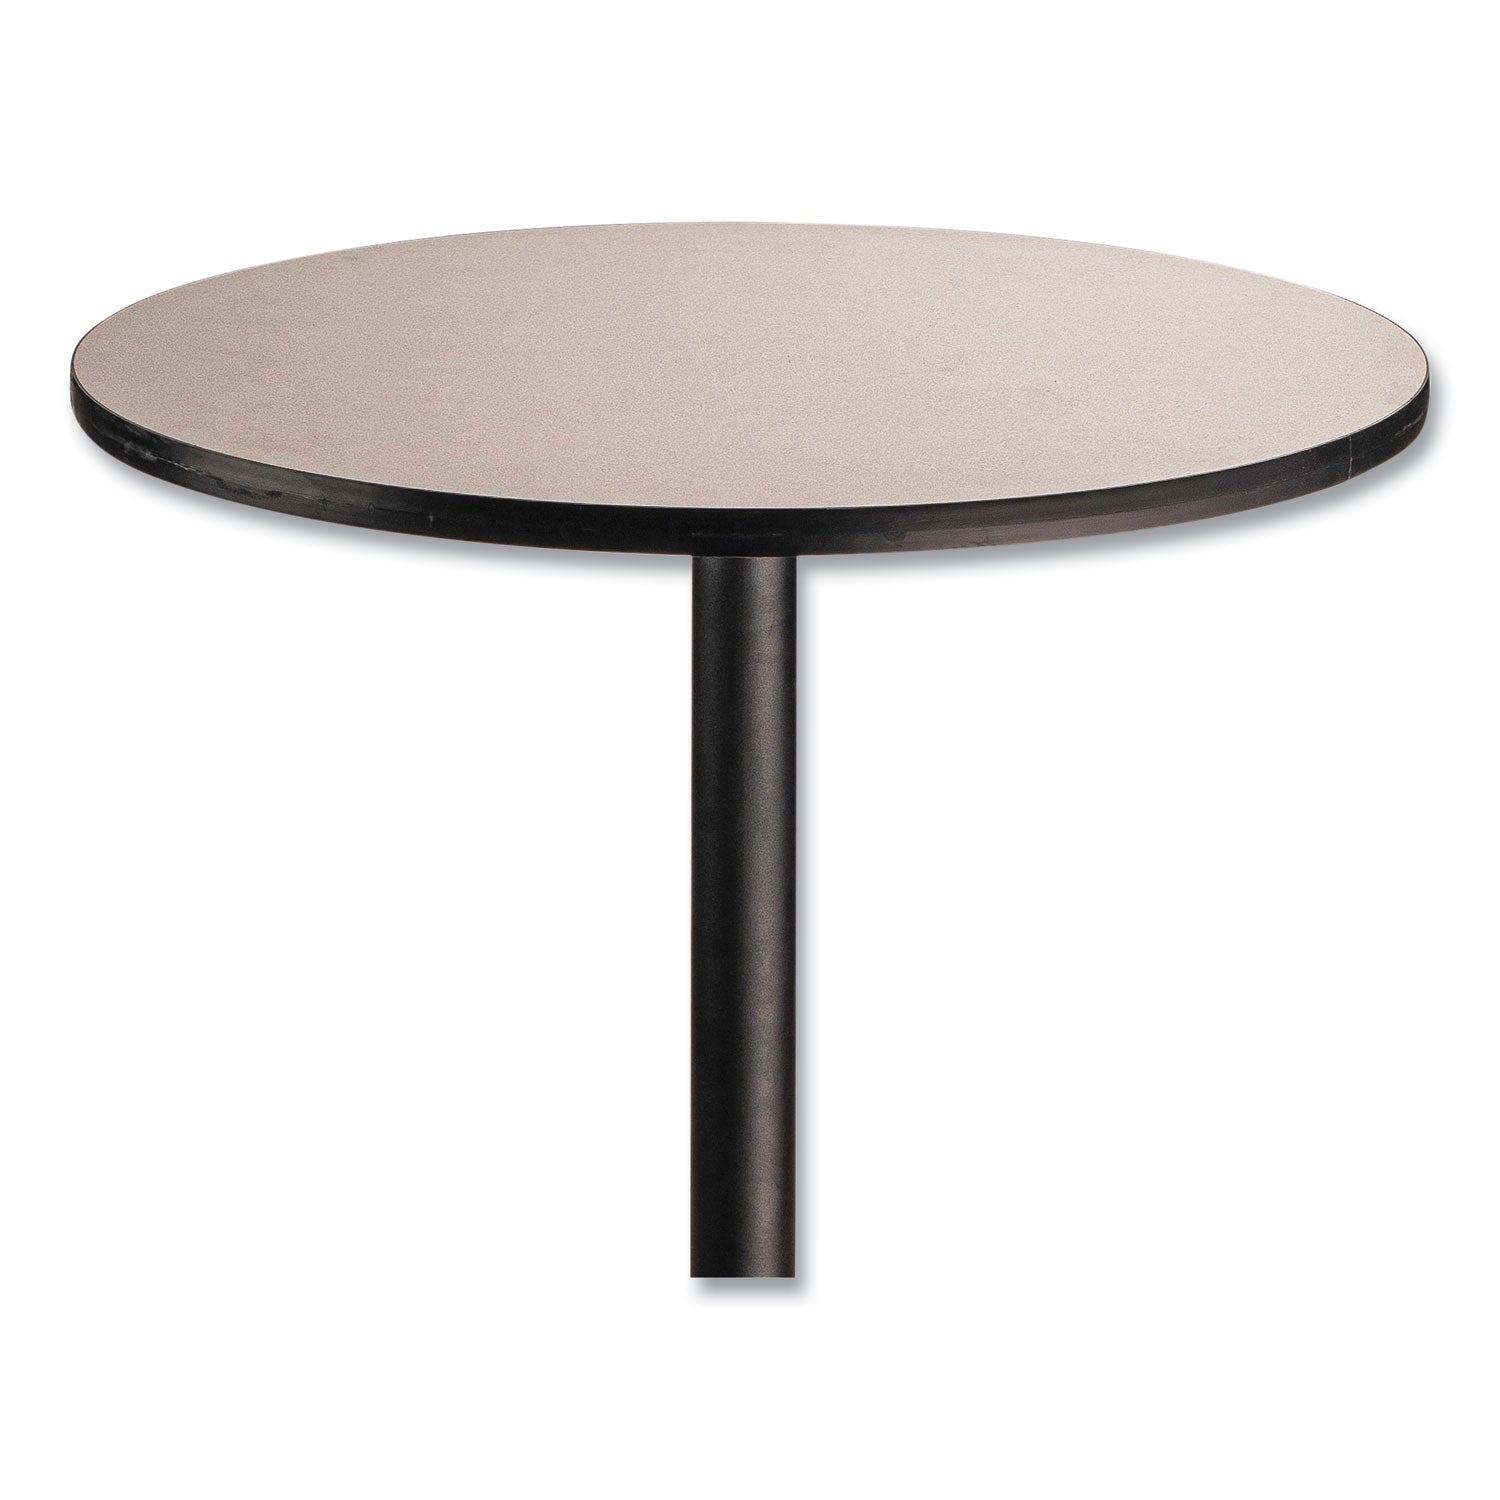 cafe-table-36-diameter-x-30h-round-top-base-gray-nebula-top-black-base-ships-in-7-10-business-days_npsct13636rd1gy - 2